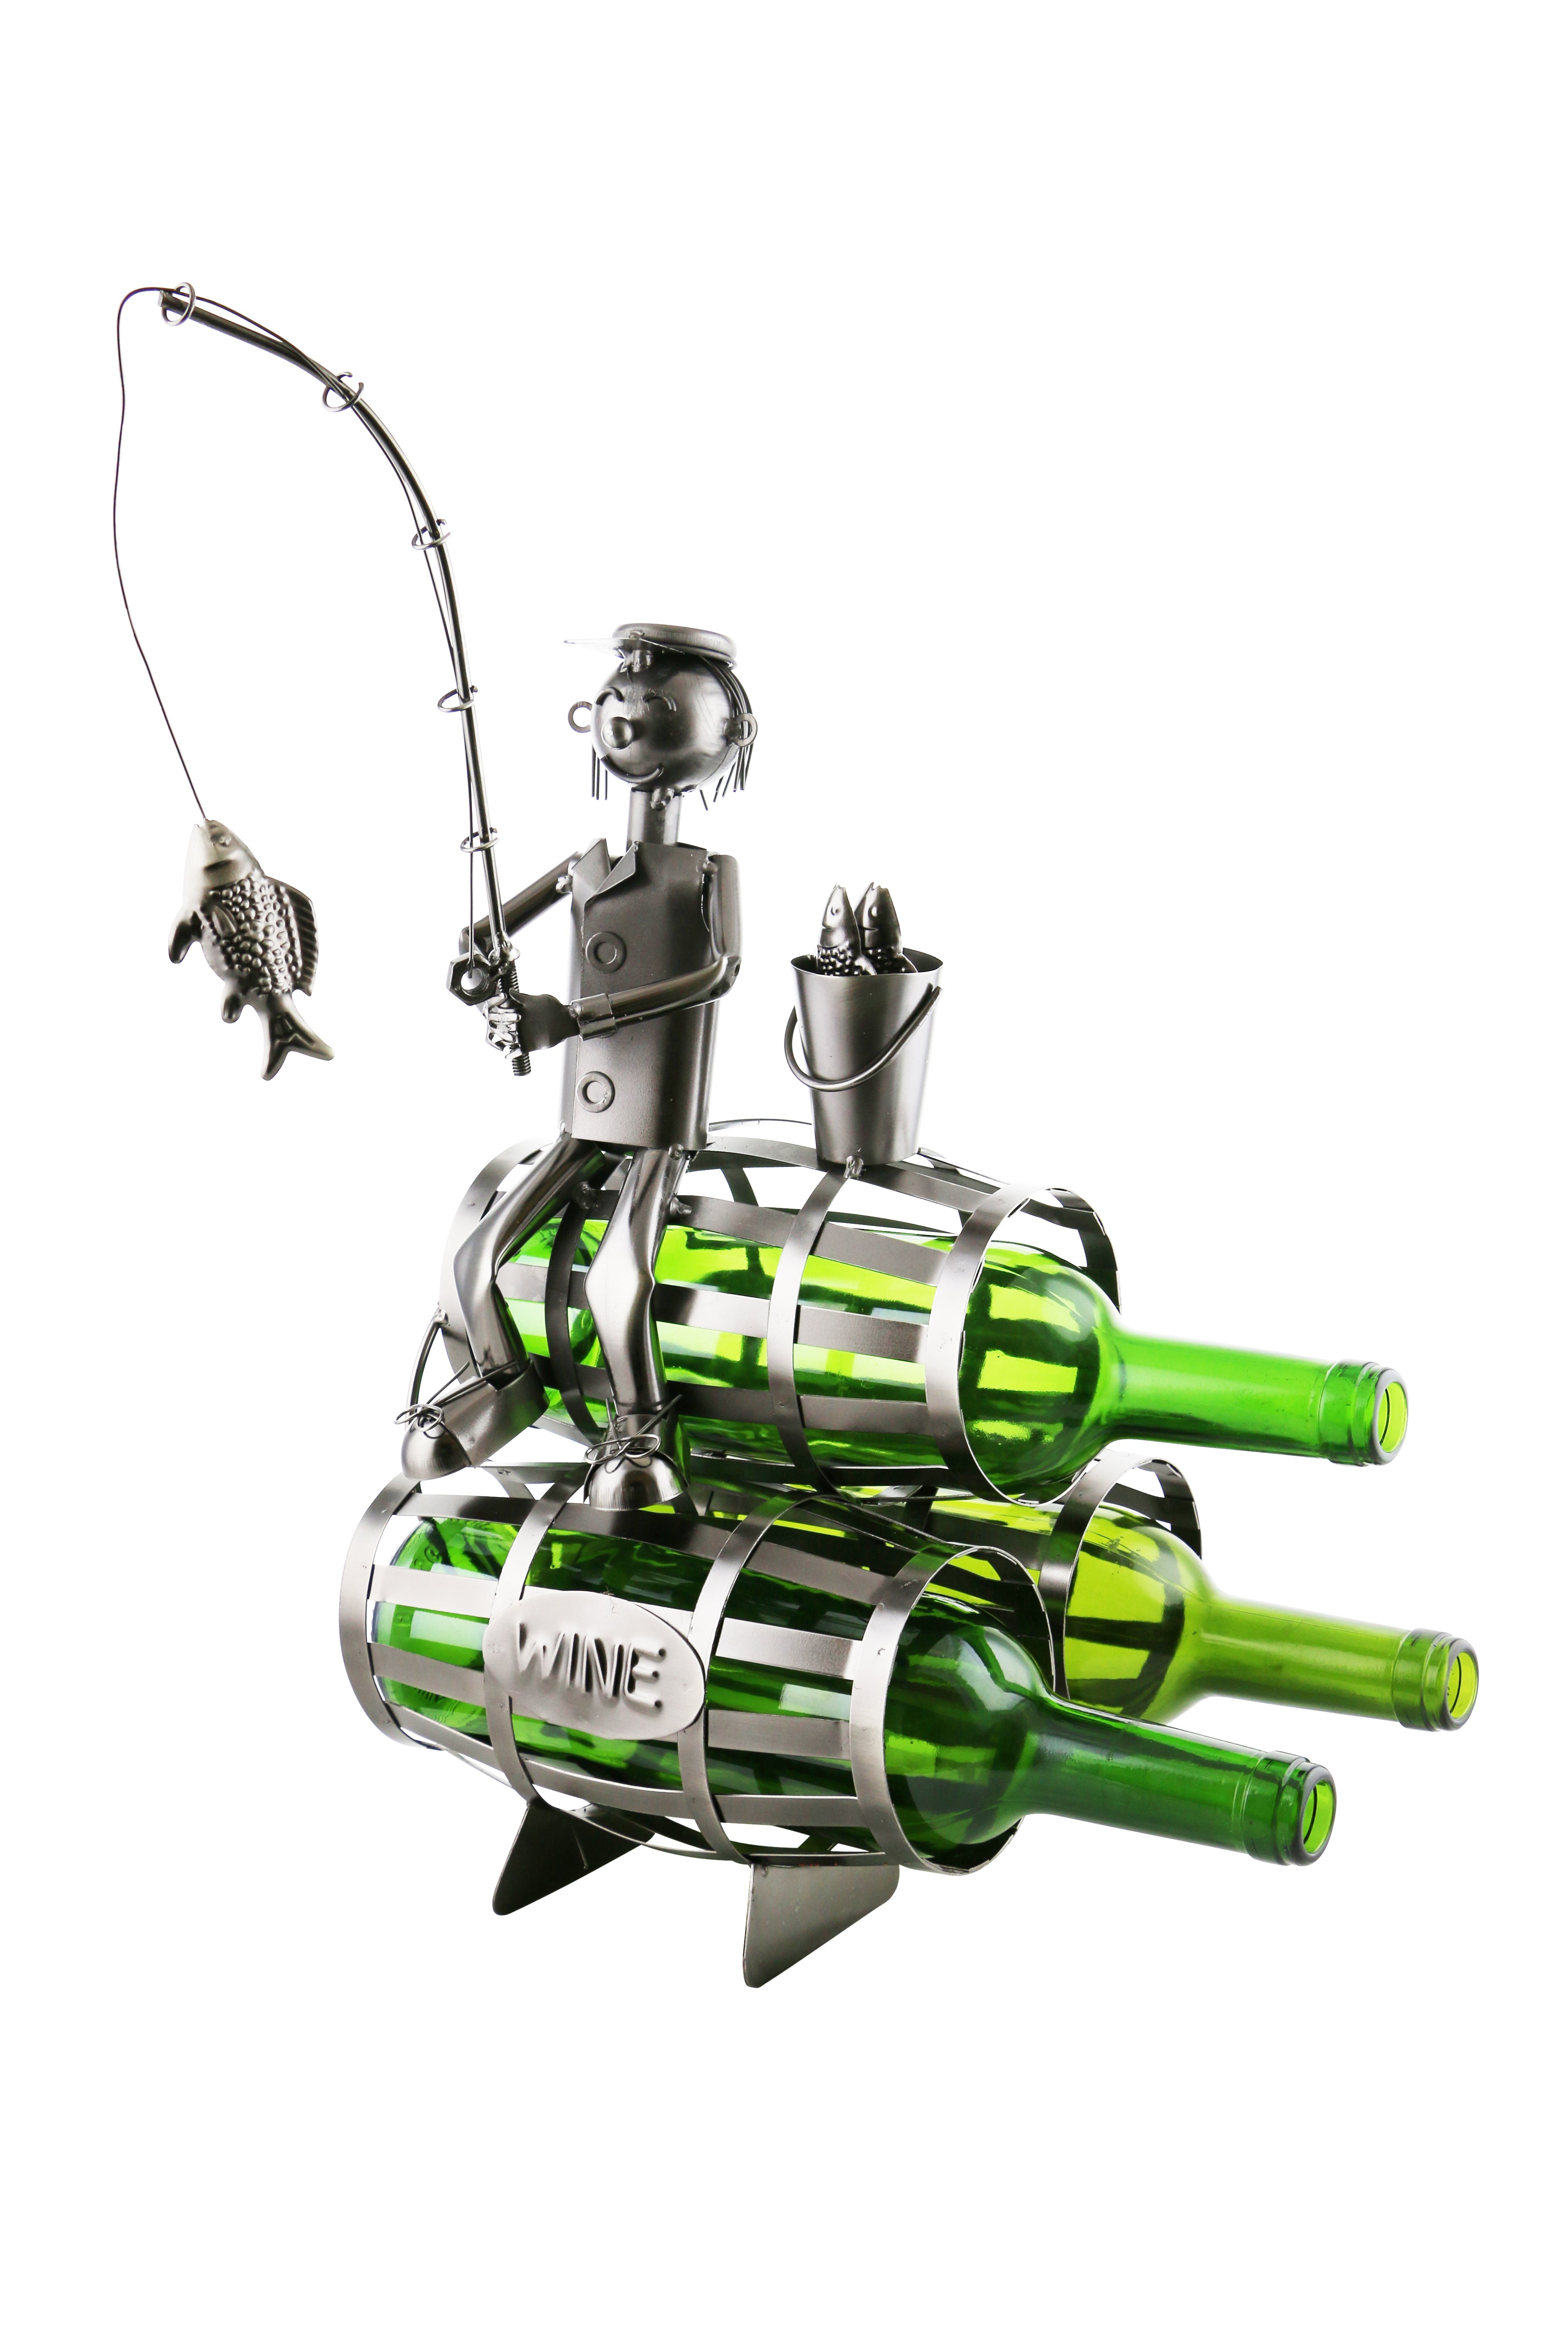 Fisherman On Three Barrels wine bottle buddy product image features a fisherman holding a fishing pole with a fish hooked on its line sitting on top of three barrels.  Product type: wine bottle holder.  Material: recycled metal.   Color: silver.  Wine bottle capacity: Holds three 750ml bottles of choice.   Bottles not included.